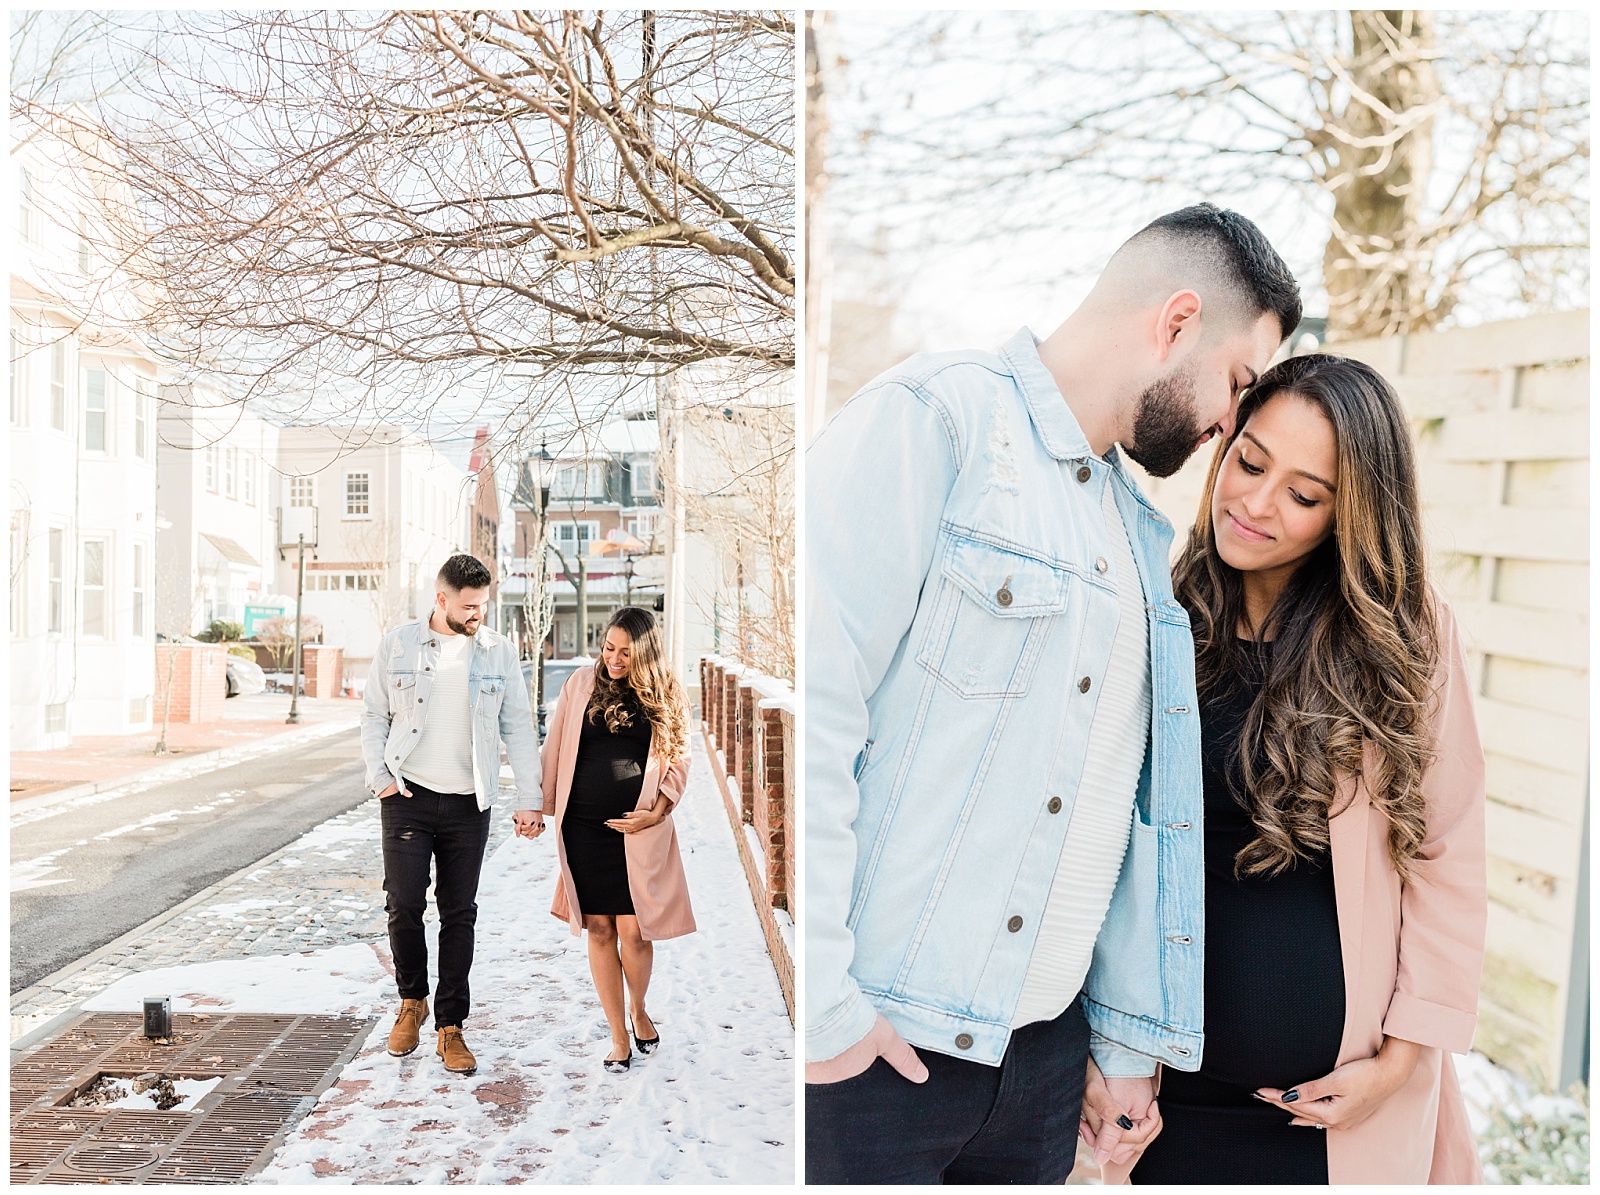 Maternity Session, Family, Baby, New Parents, Maternity Shoot, Pregnant, Pregnancy Photos, New Jersey, Photographer, Haddonfield, NJ, Haddon Heights, Town, Snowy, Winter,